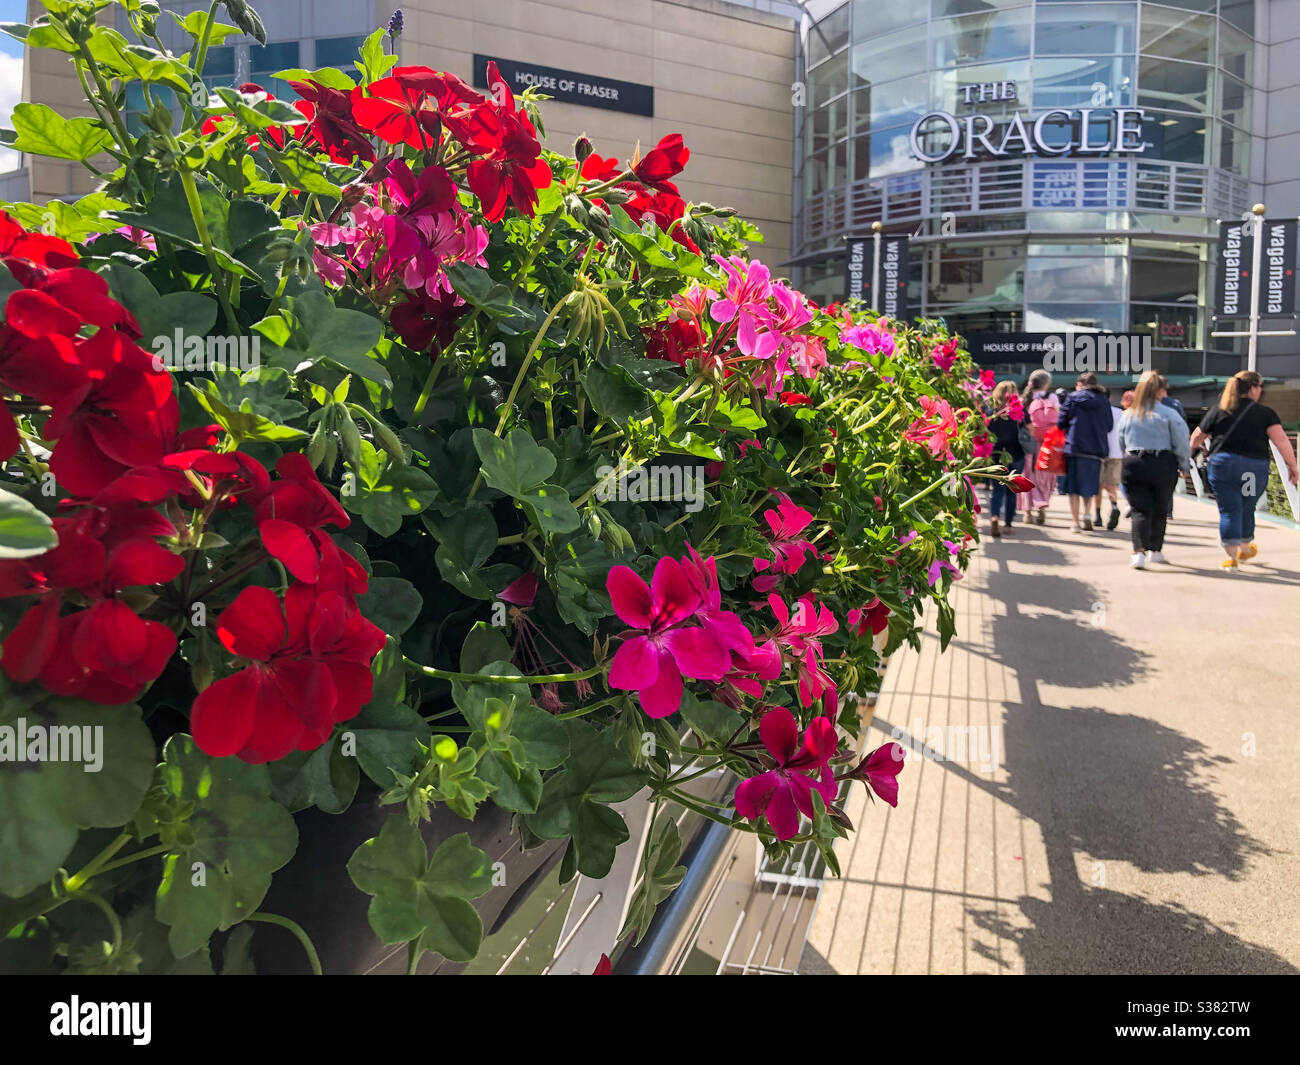 Baskets of bedding plants line a public walkway at the entrance to The Oracle shopping centre in Reading, UK. Stock Photo